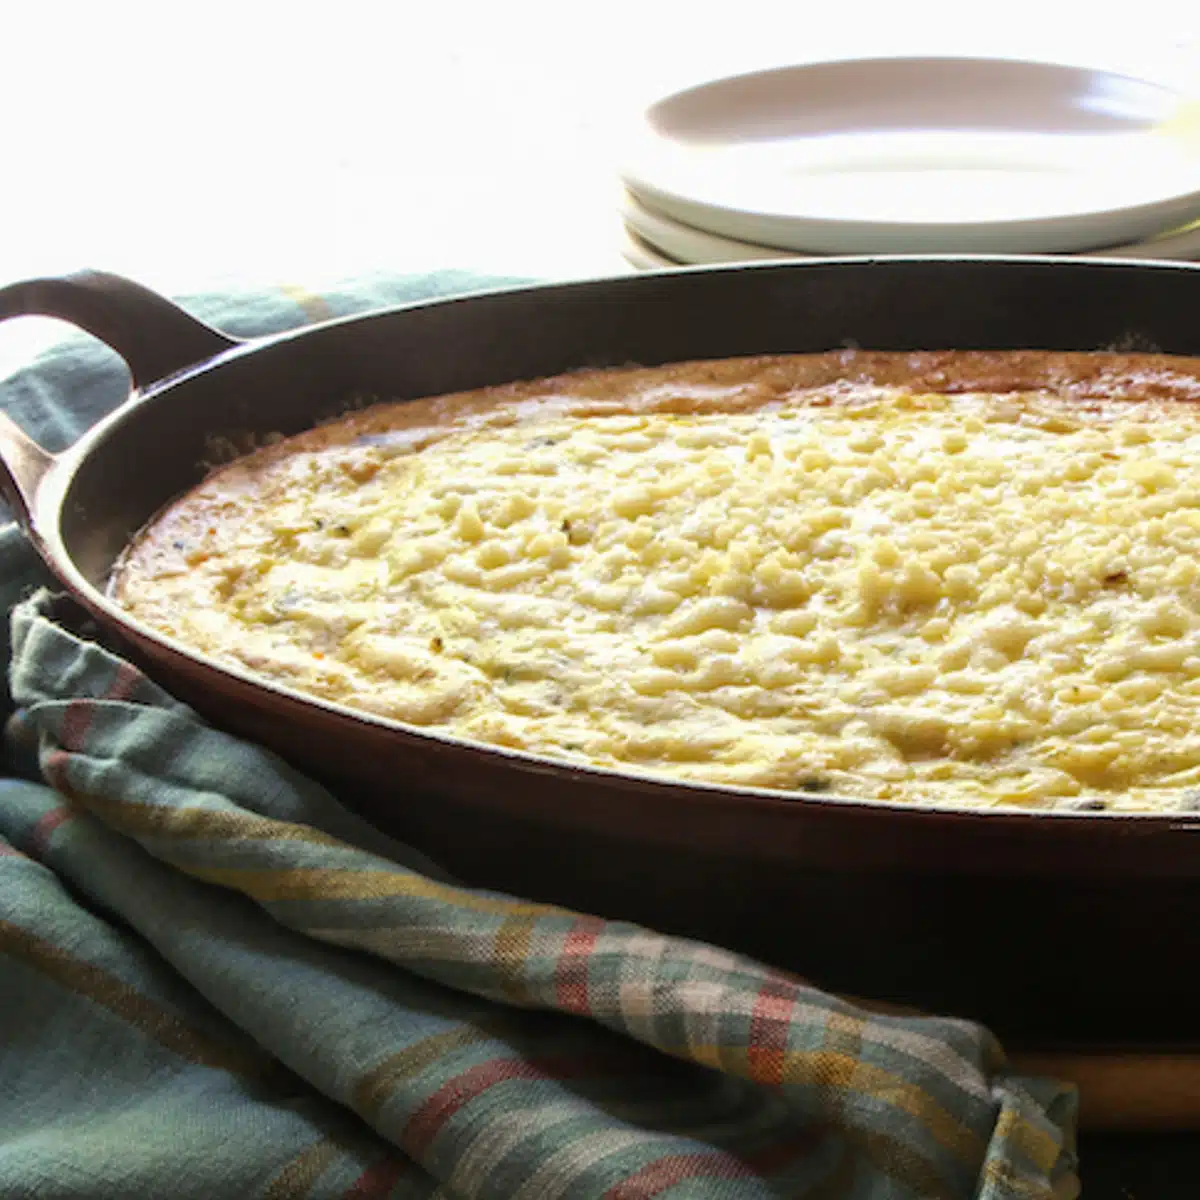 Corn pudding baked in a skillet, ready to serve.